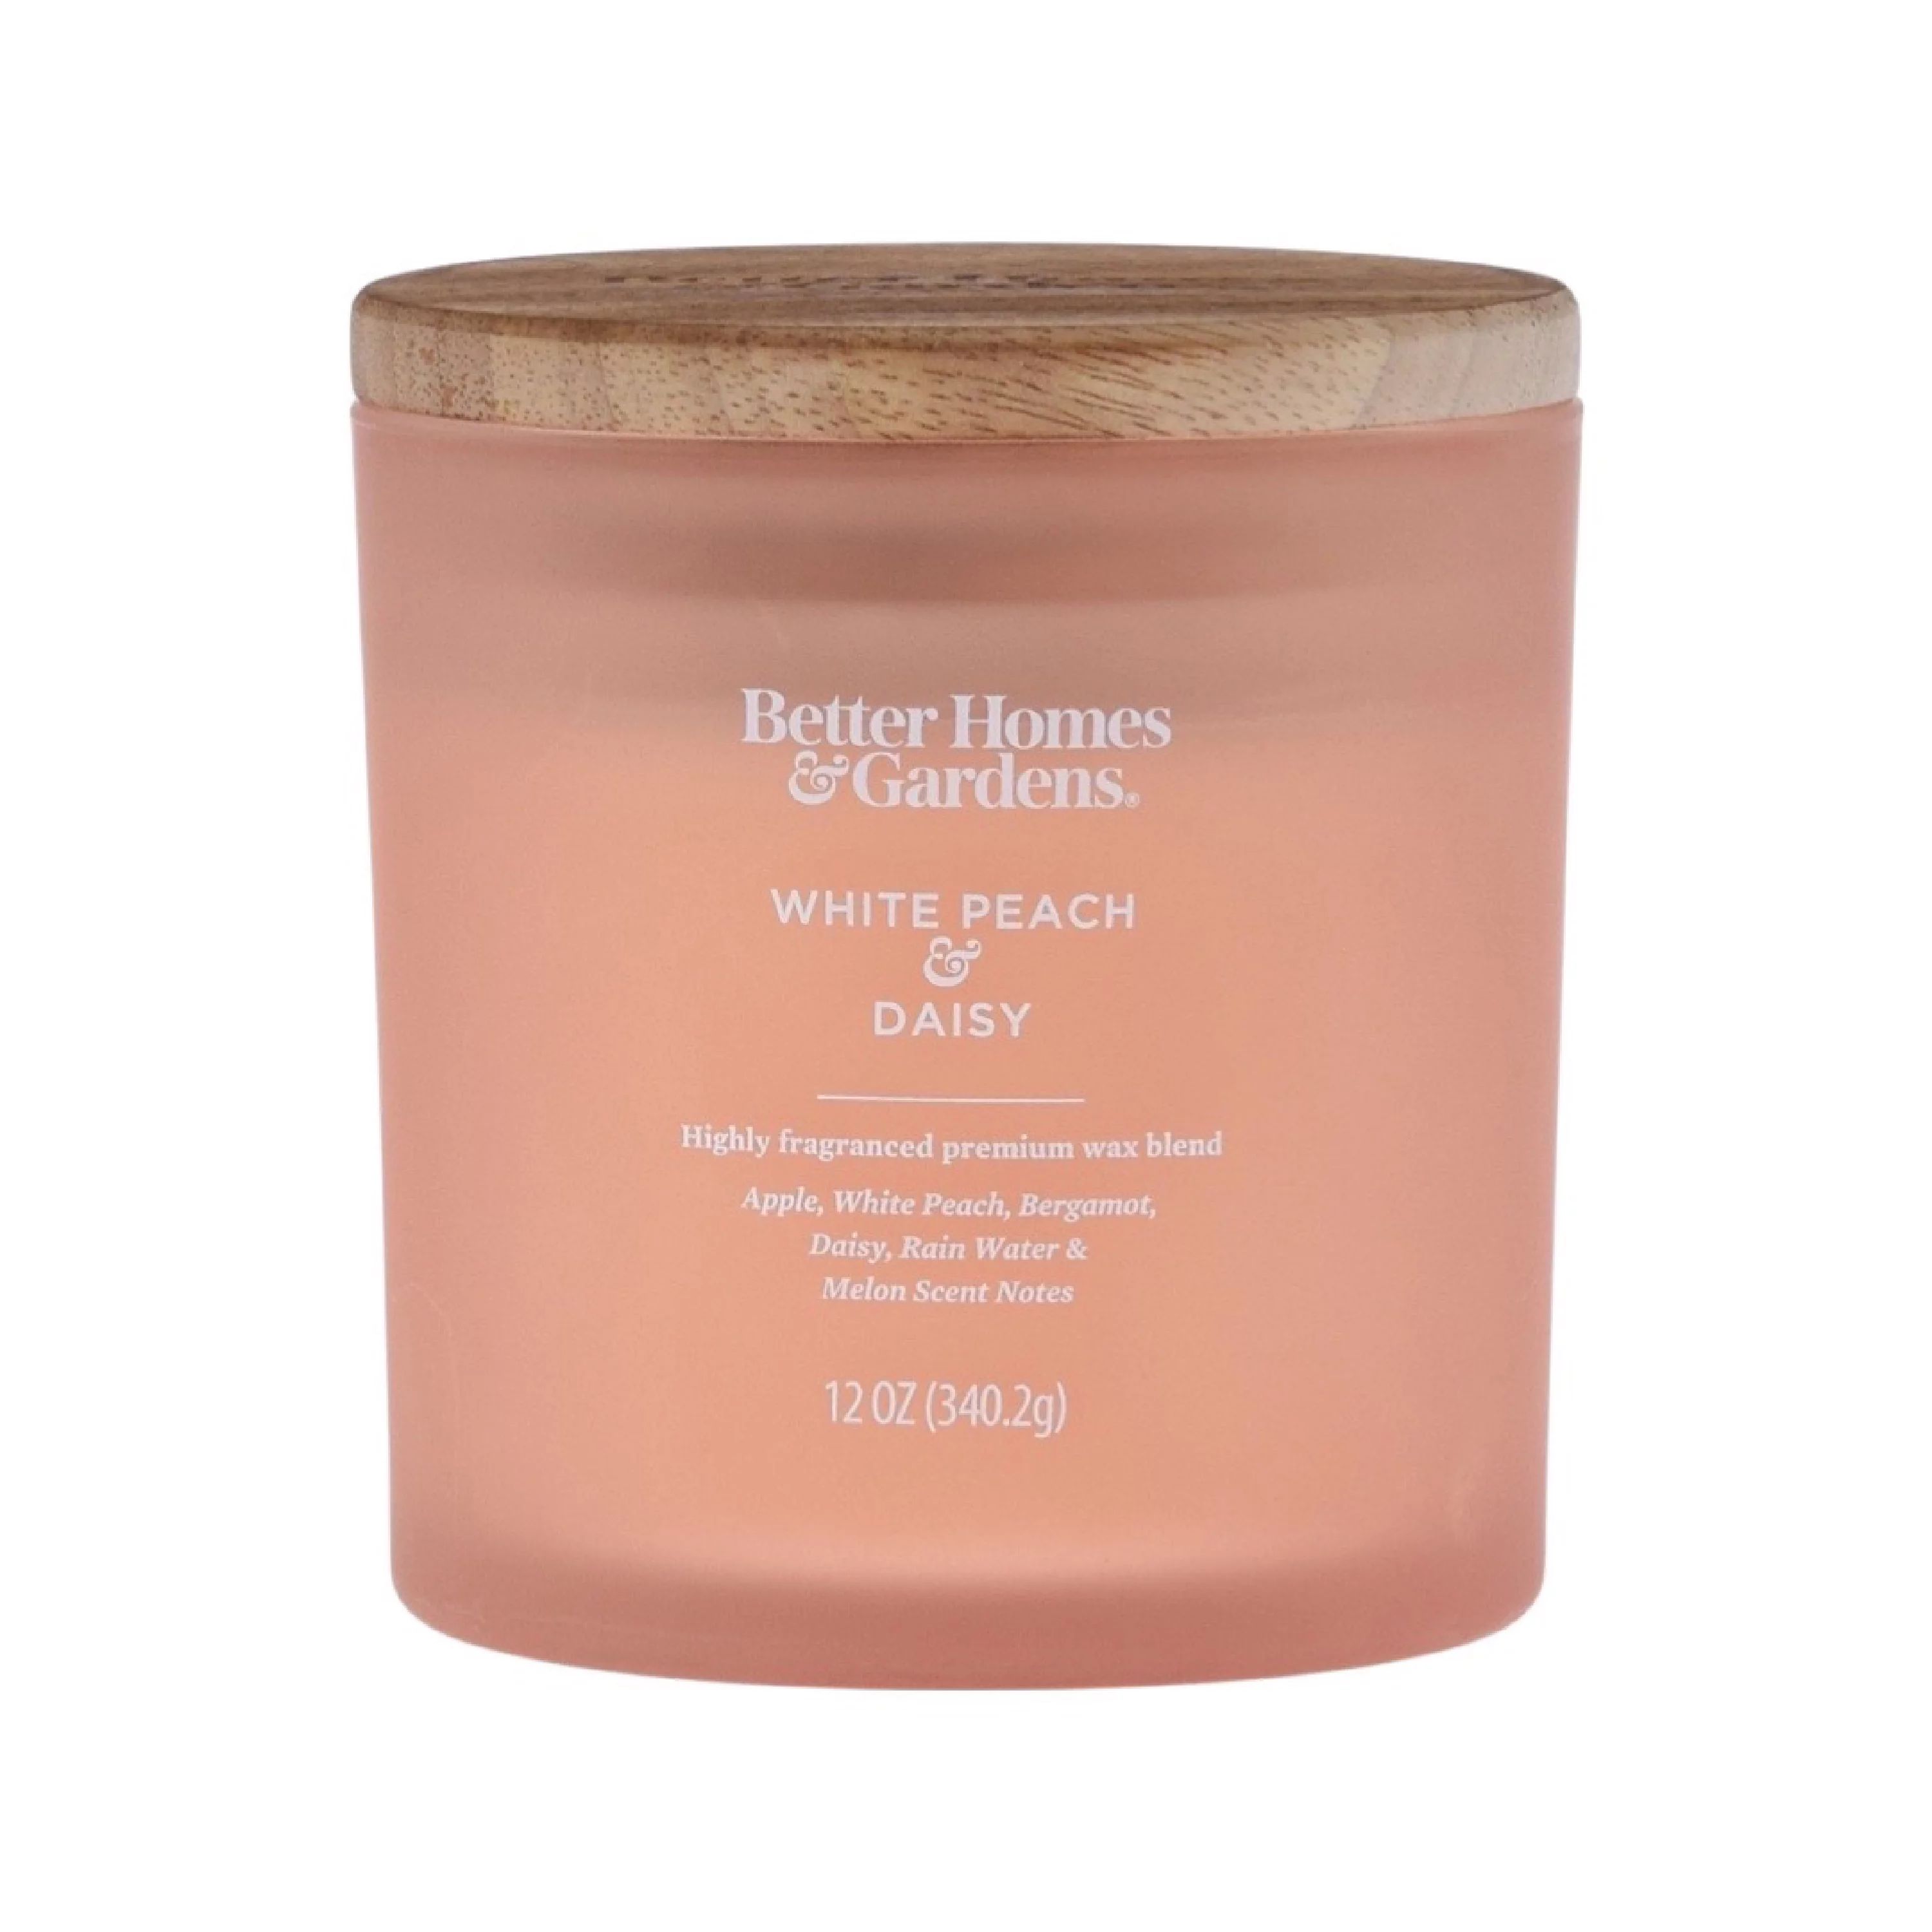 Better Homes & Gardens White Peach & Daisy Scented 12oz 2-wick Candle | Walmart (US)